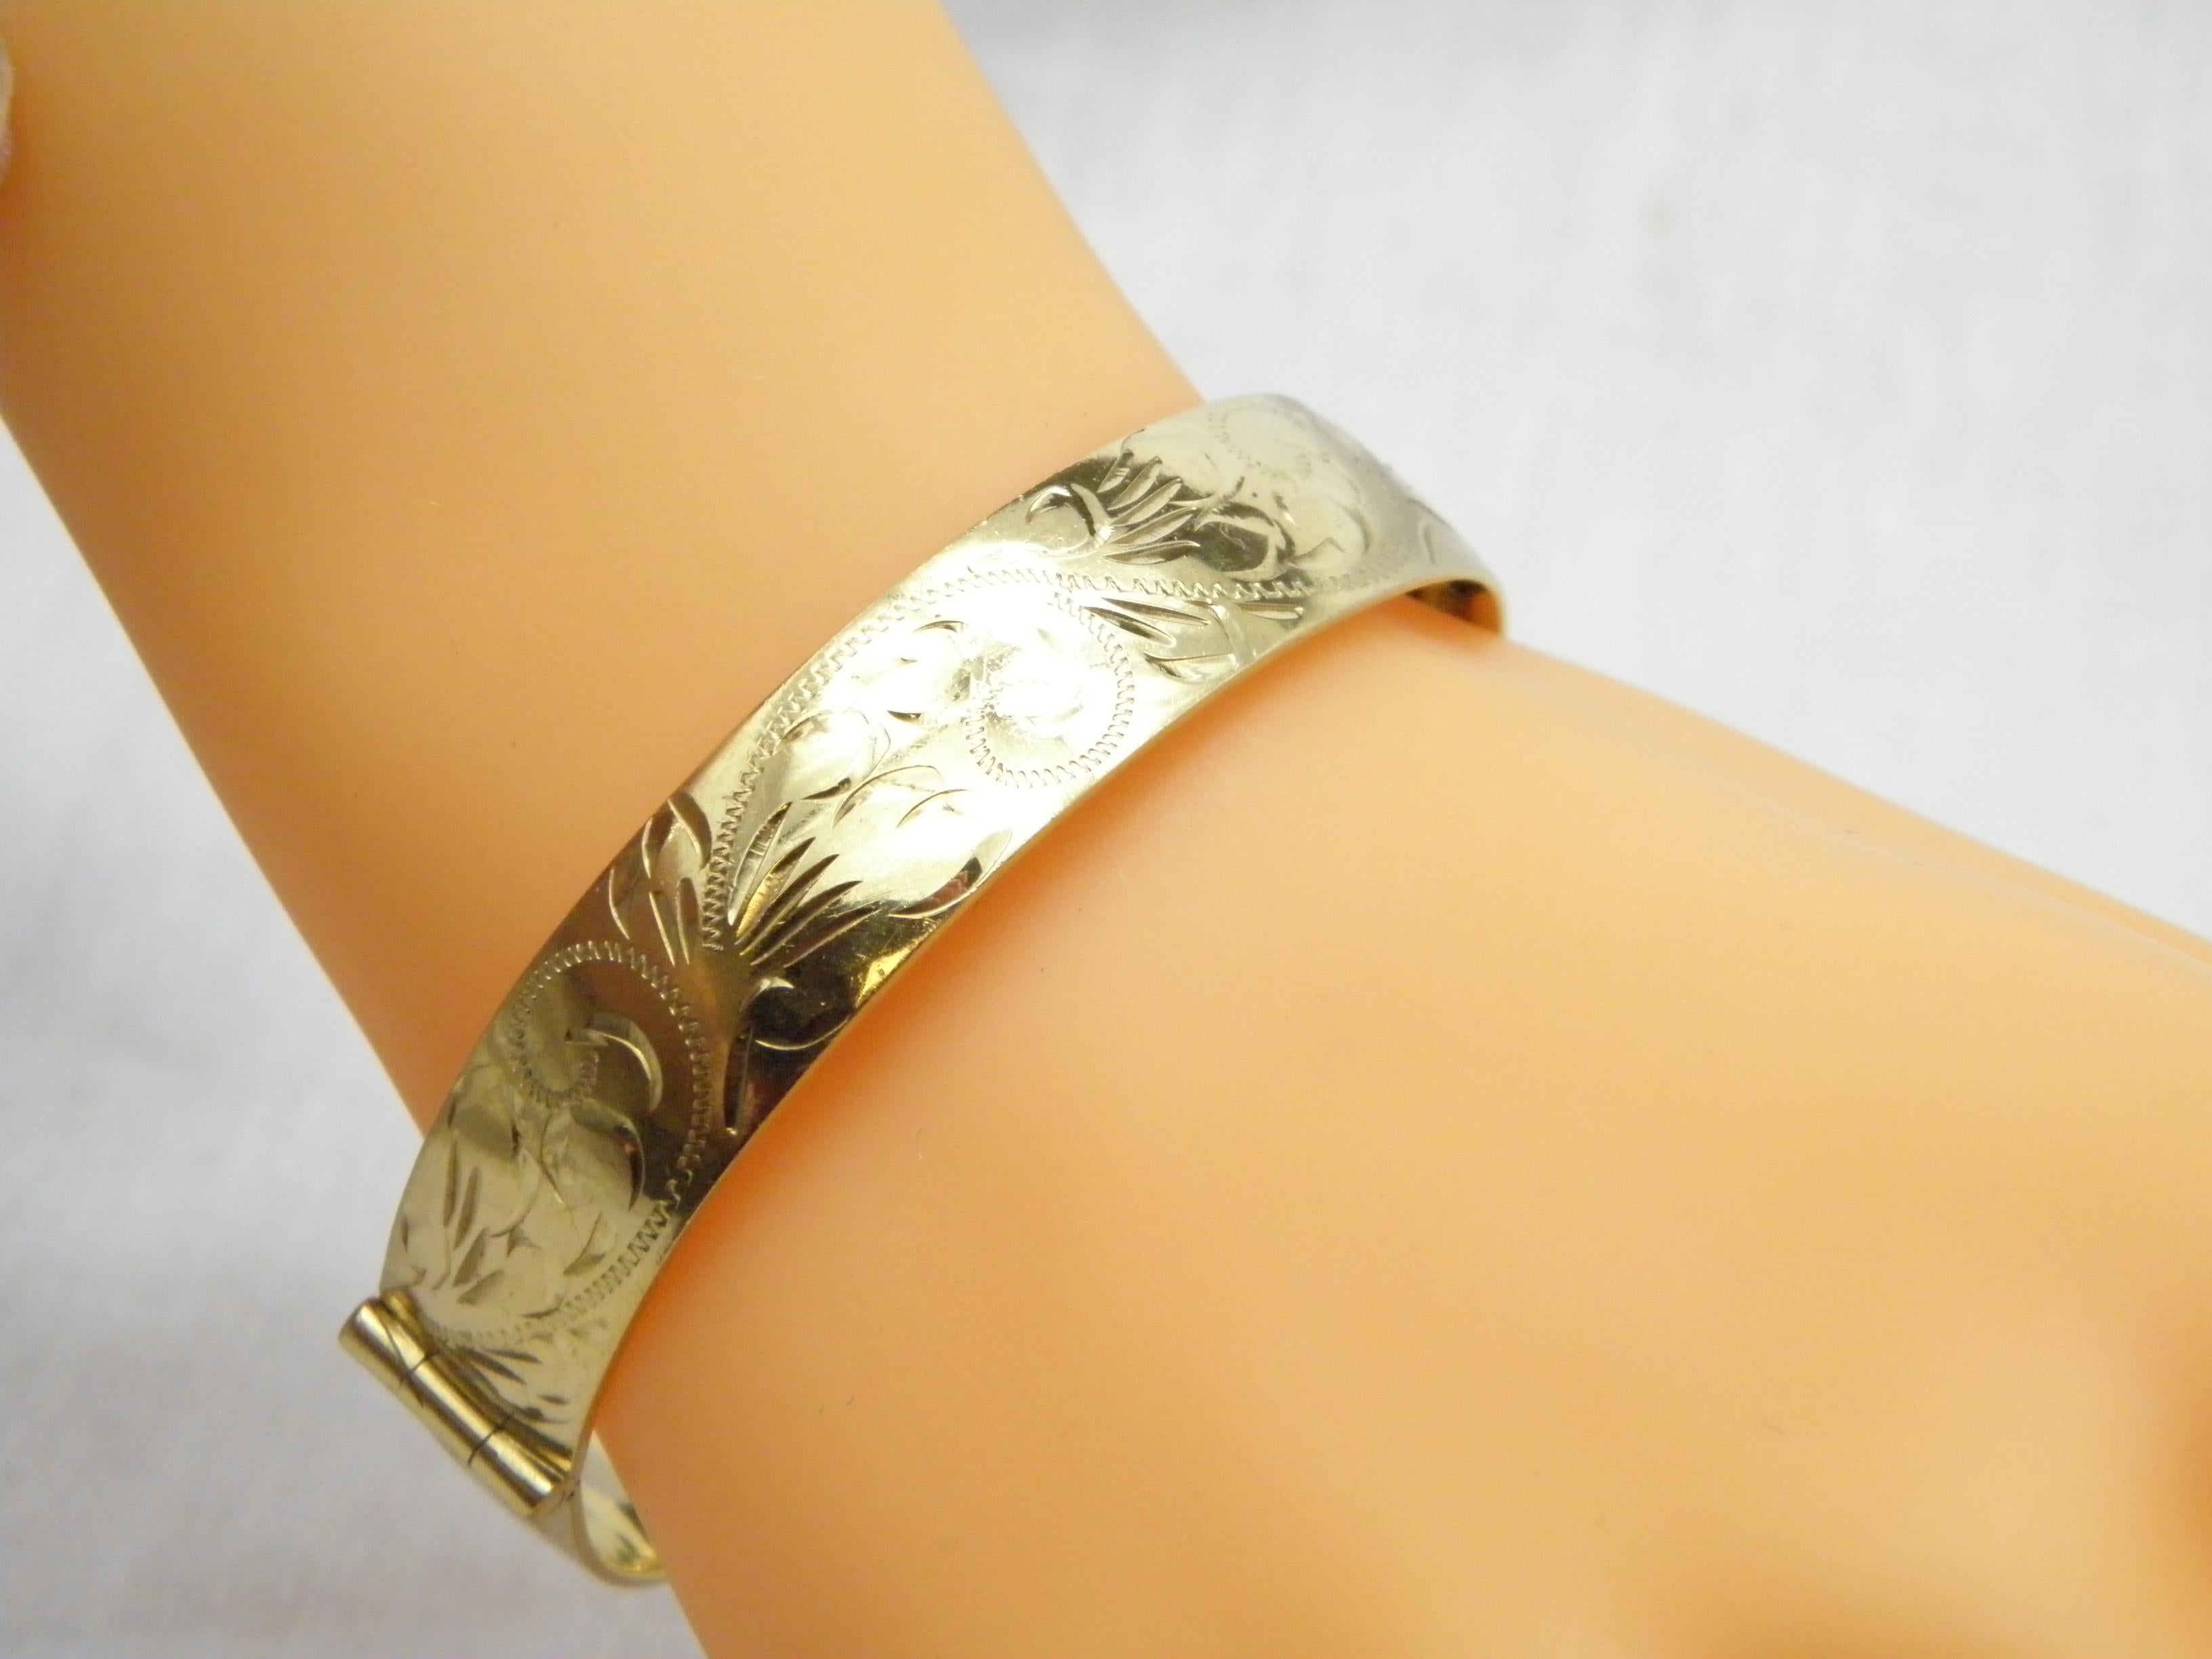 Bargain Vintage 9ct Gold 'Rolled' Floral Cuff Hinged Bracelet Bangle 375 Purity  For Sale 3